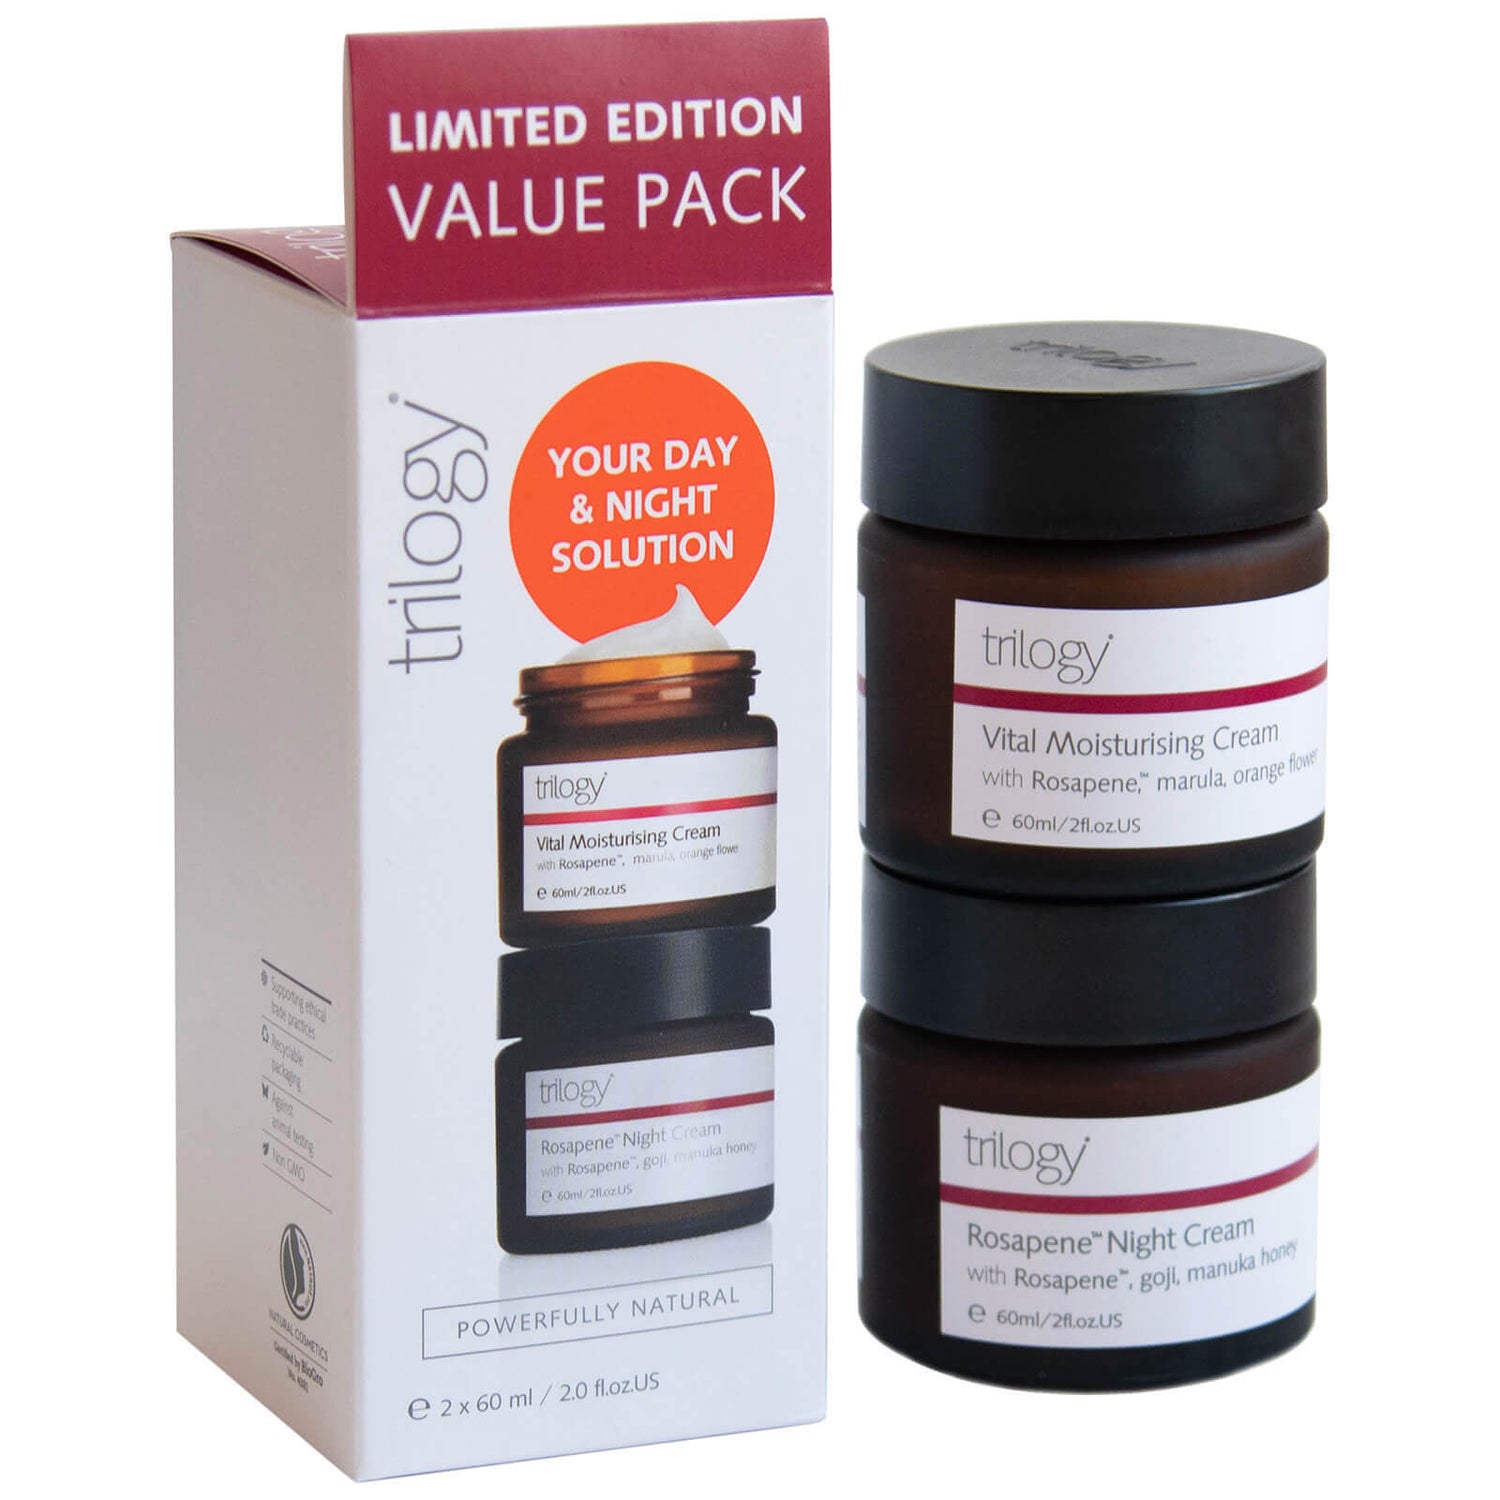 Trilogy Rosehip Day and Night Pack - Limited Edition (Worth £55.00)